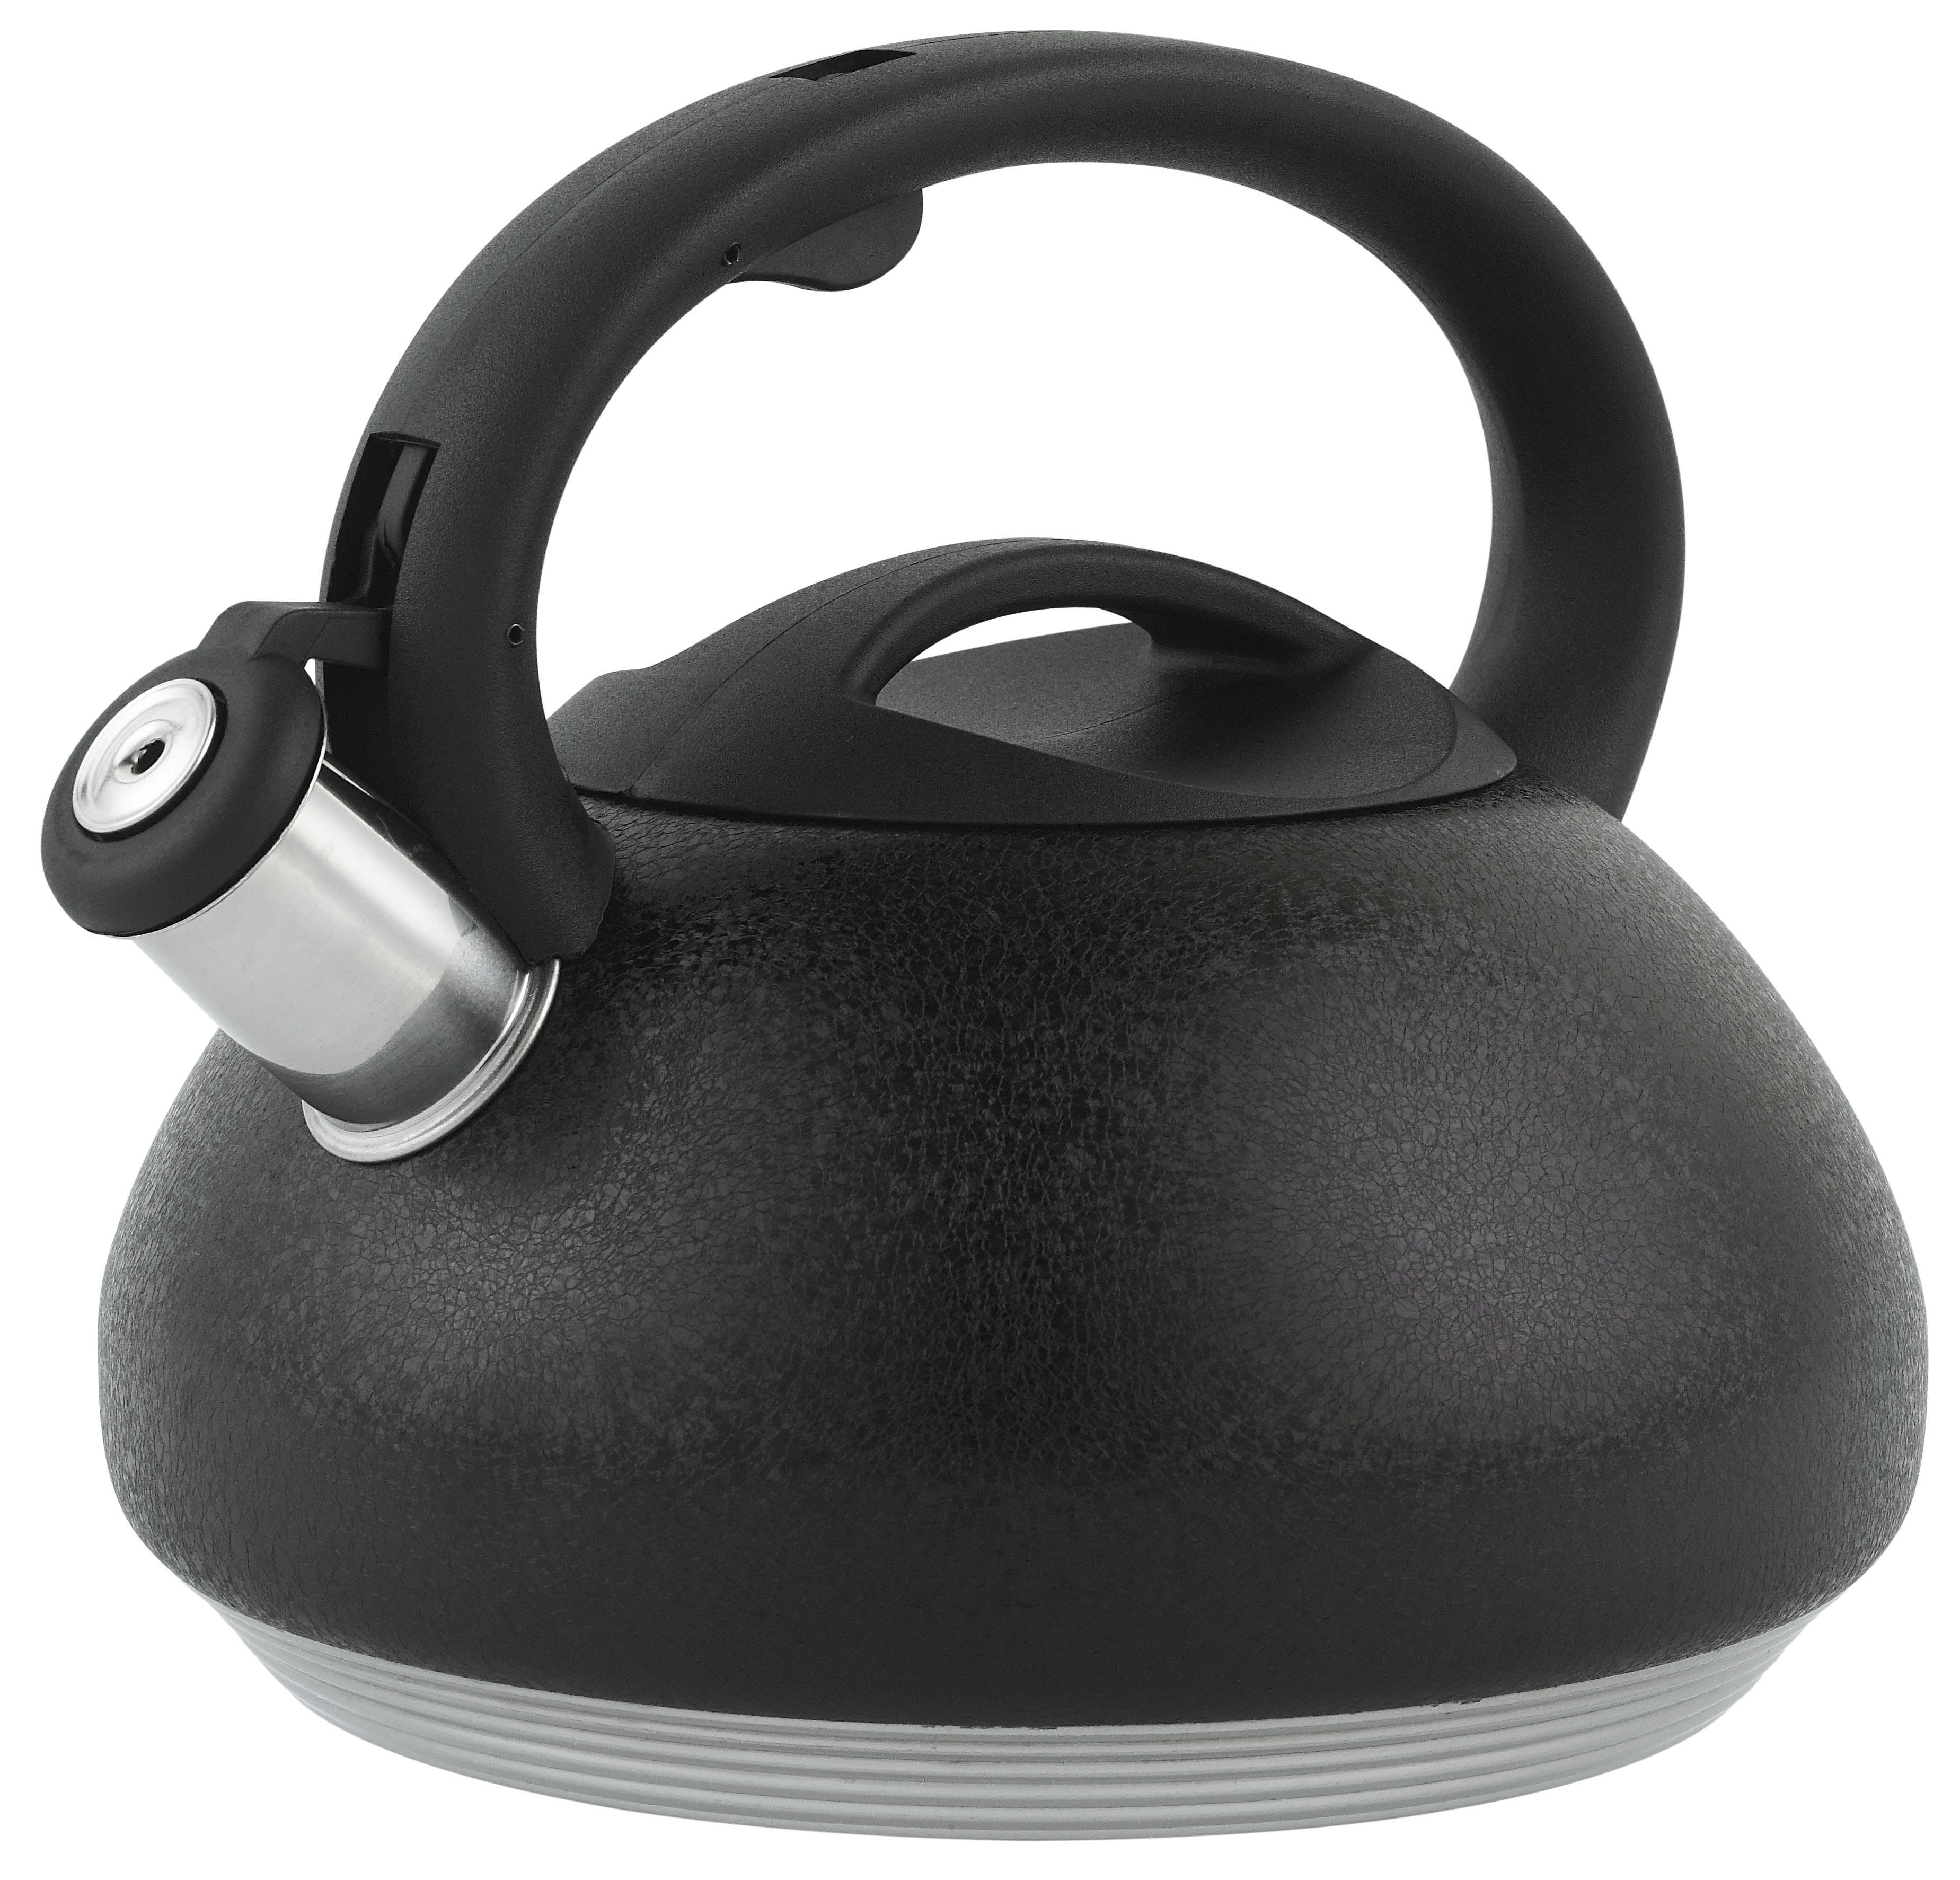 Whistle Kettle Review - Benefits and Drawbacks